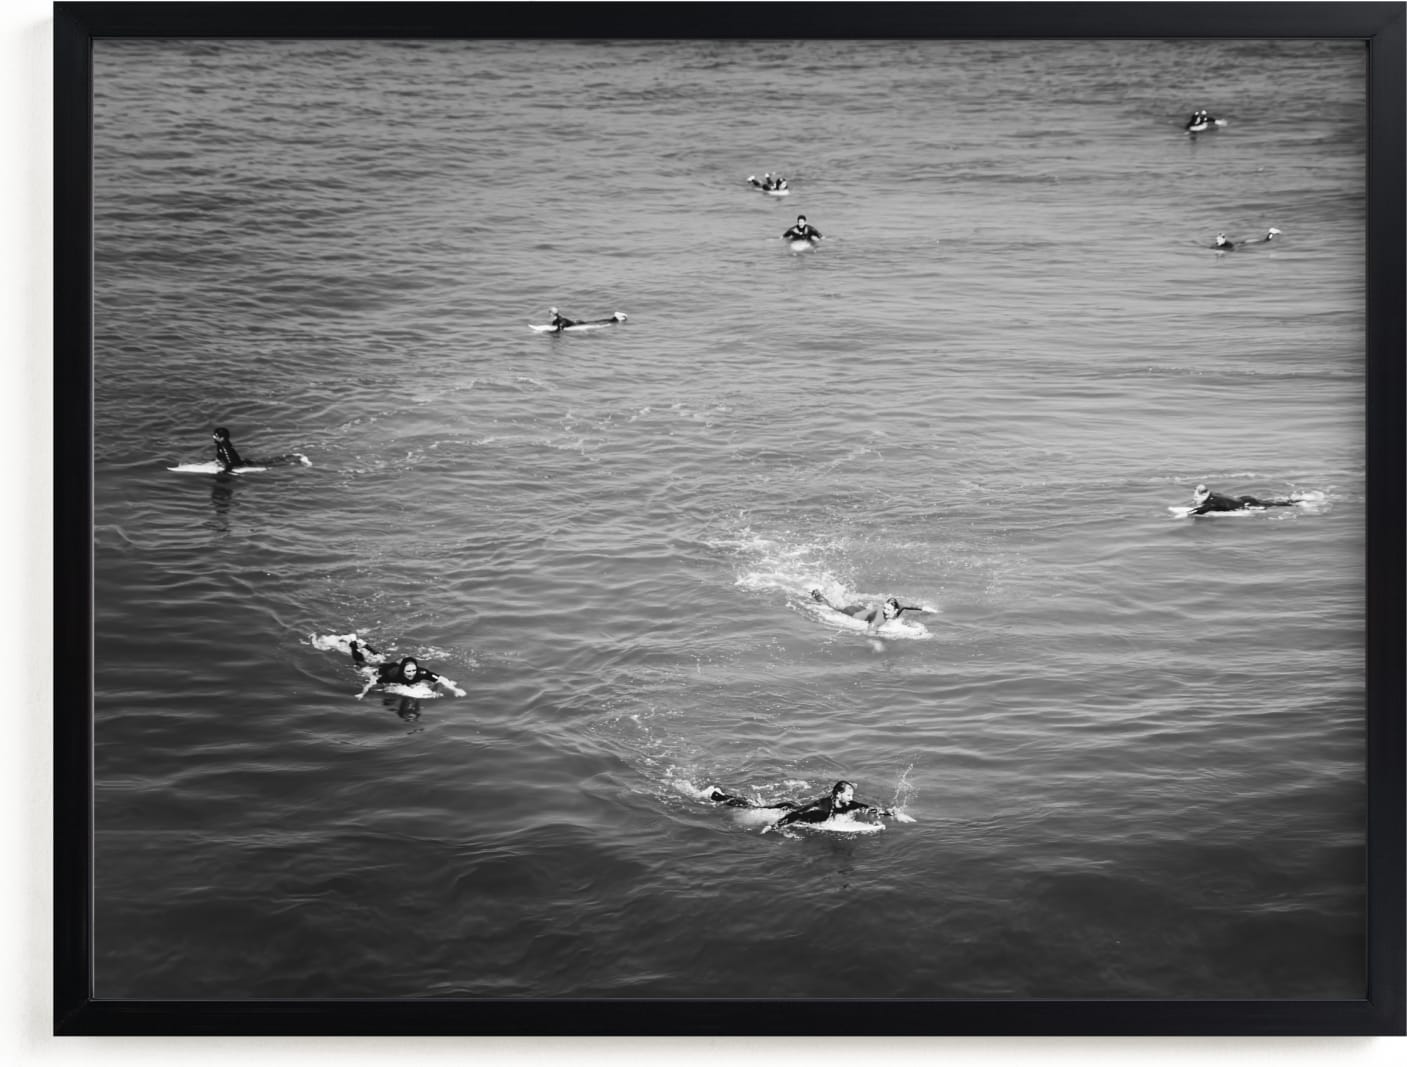 This is a black and white art by Sherley Ferreira called Surfing at Huntington.